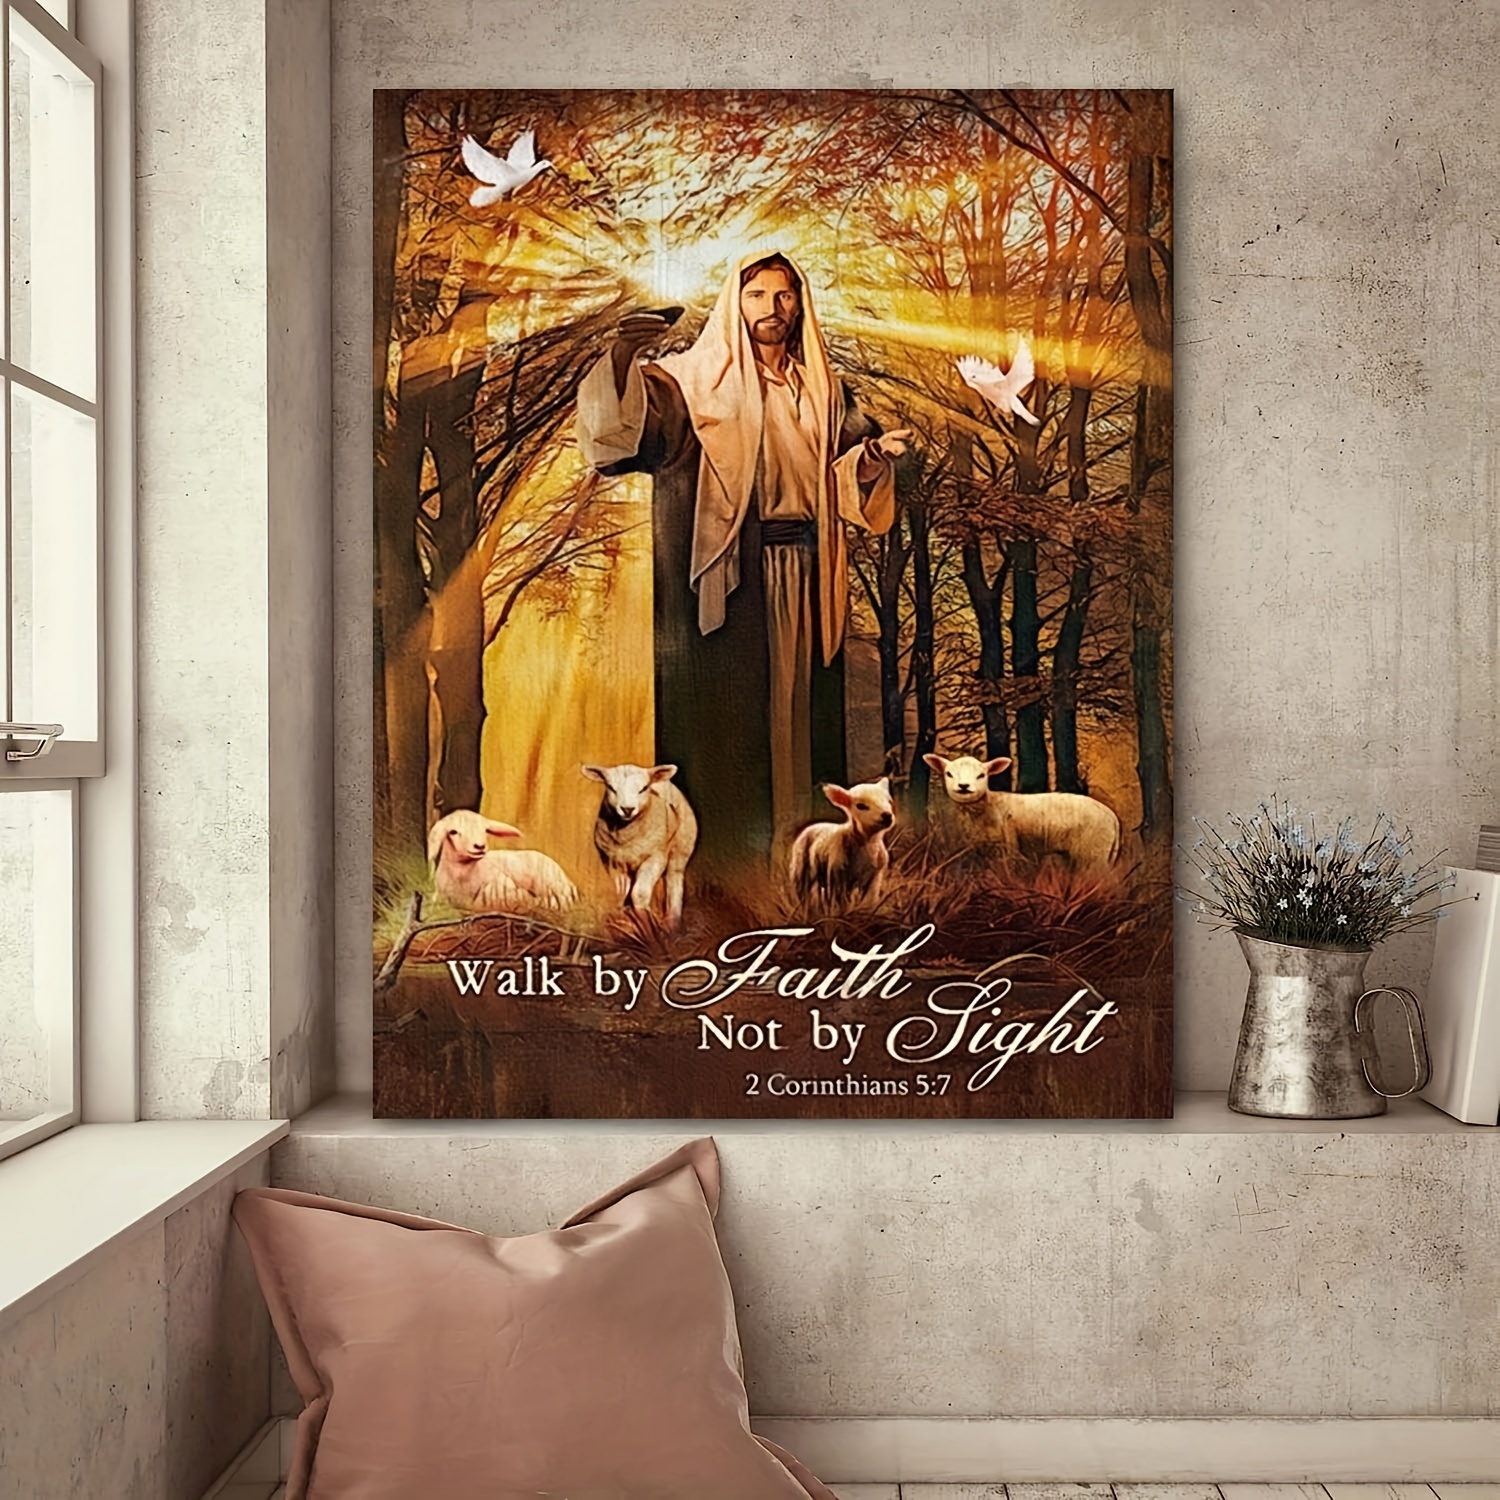  DIY 5D Diamond Painting Christian Religious Lion and Lamb Under  The Cross Artwork Gift Choice for Religious Families Kits for Adults for  Home Wall Decor 12x16 inch